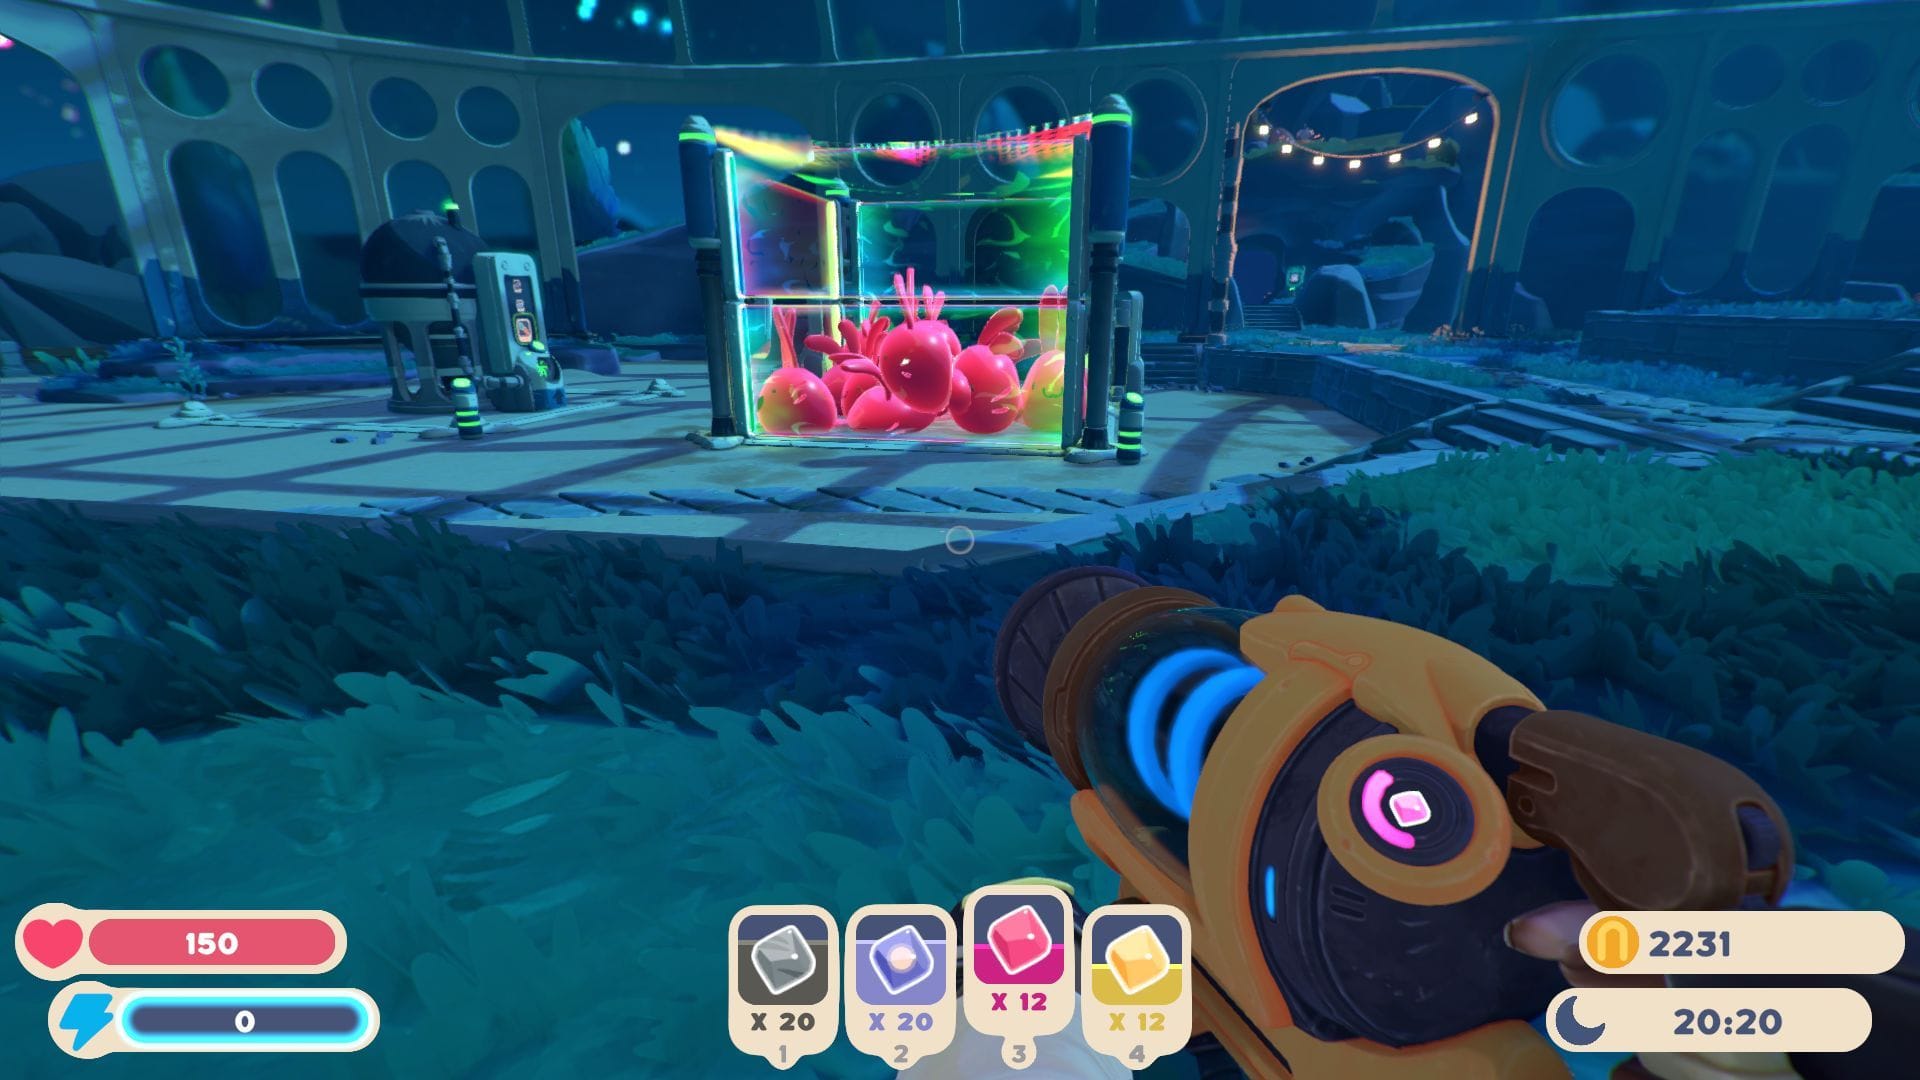 Slime Rancher 2: How to Unlock (& Use) the Market Link